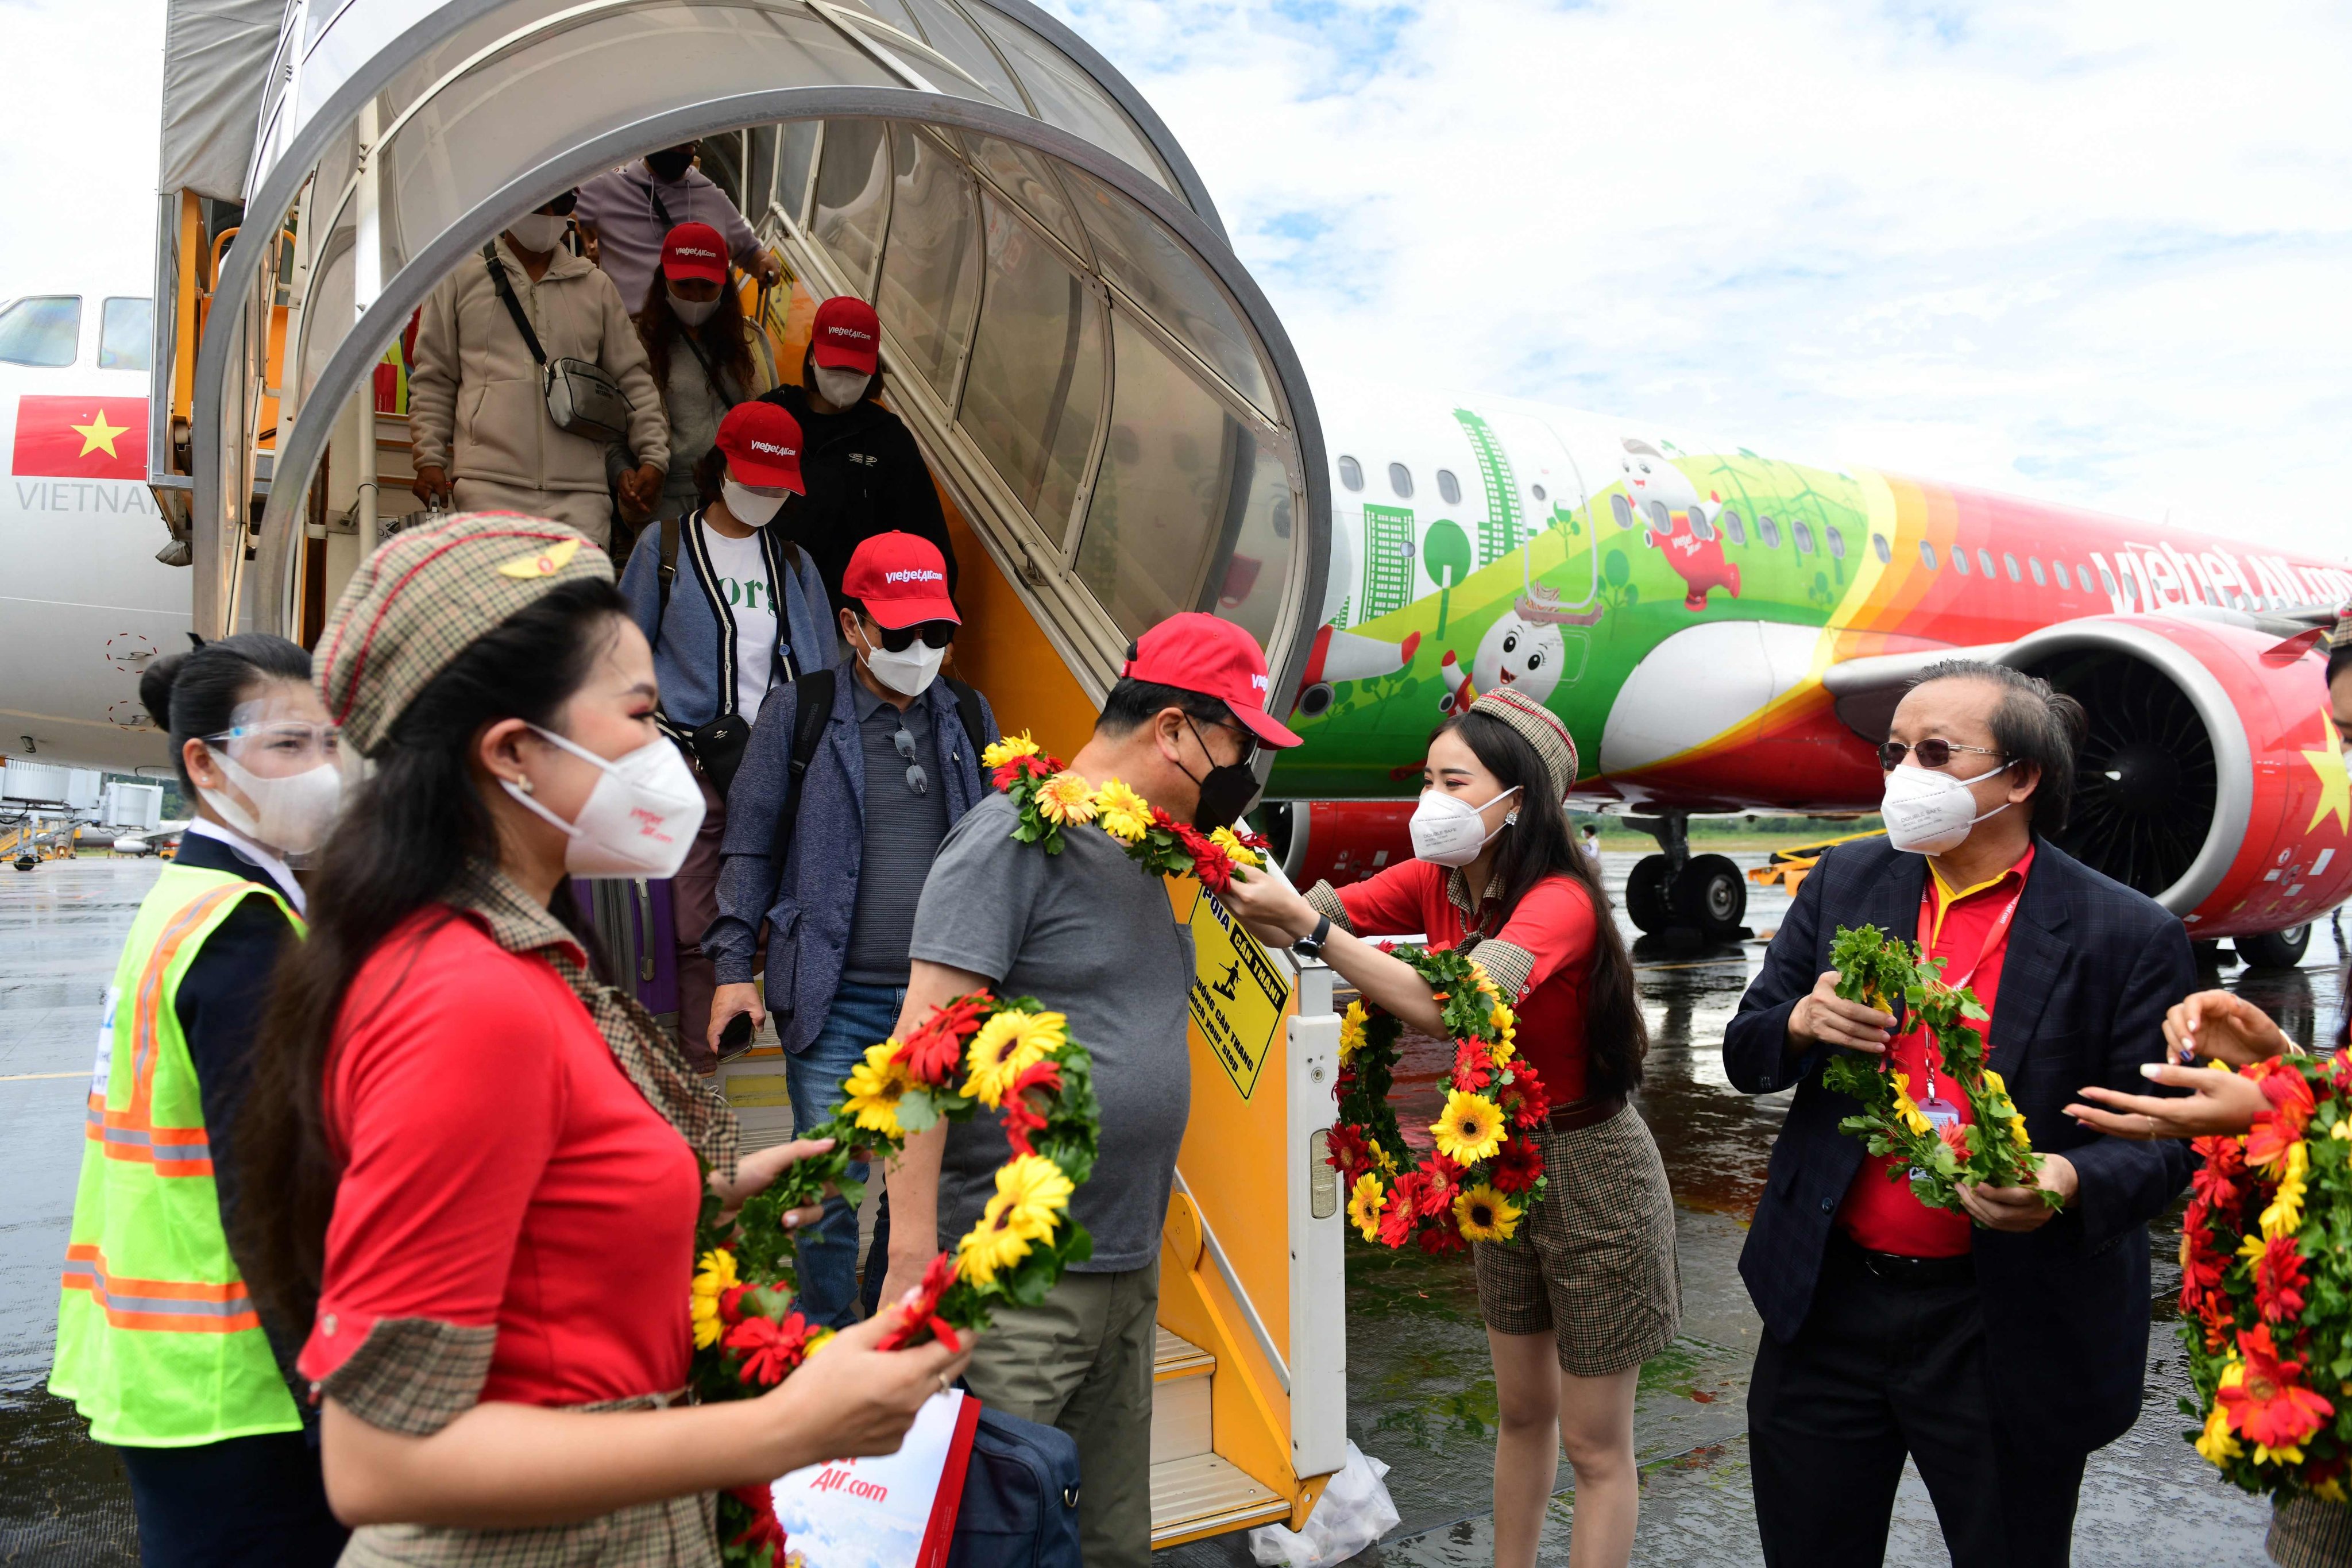 South Korean tourists arrive at Phu Quoc airport in Vietnam. File photo: AFP